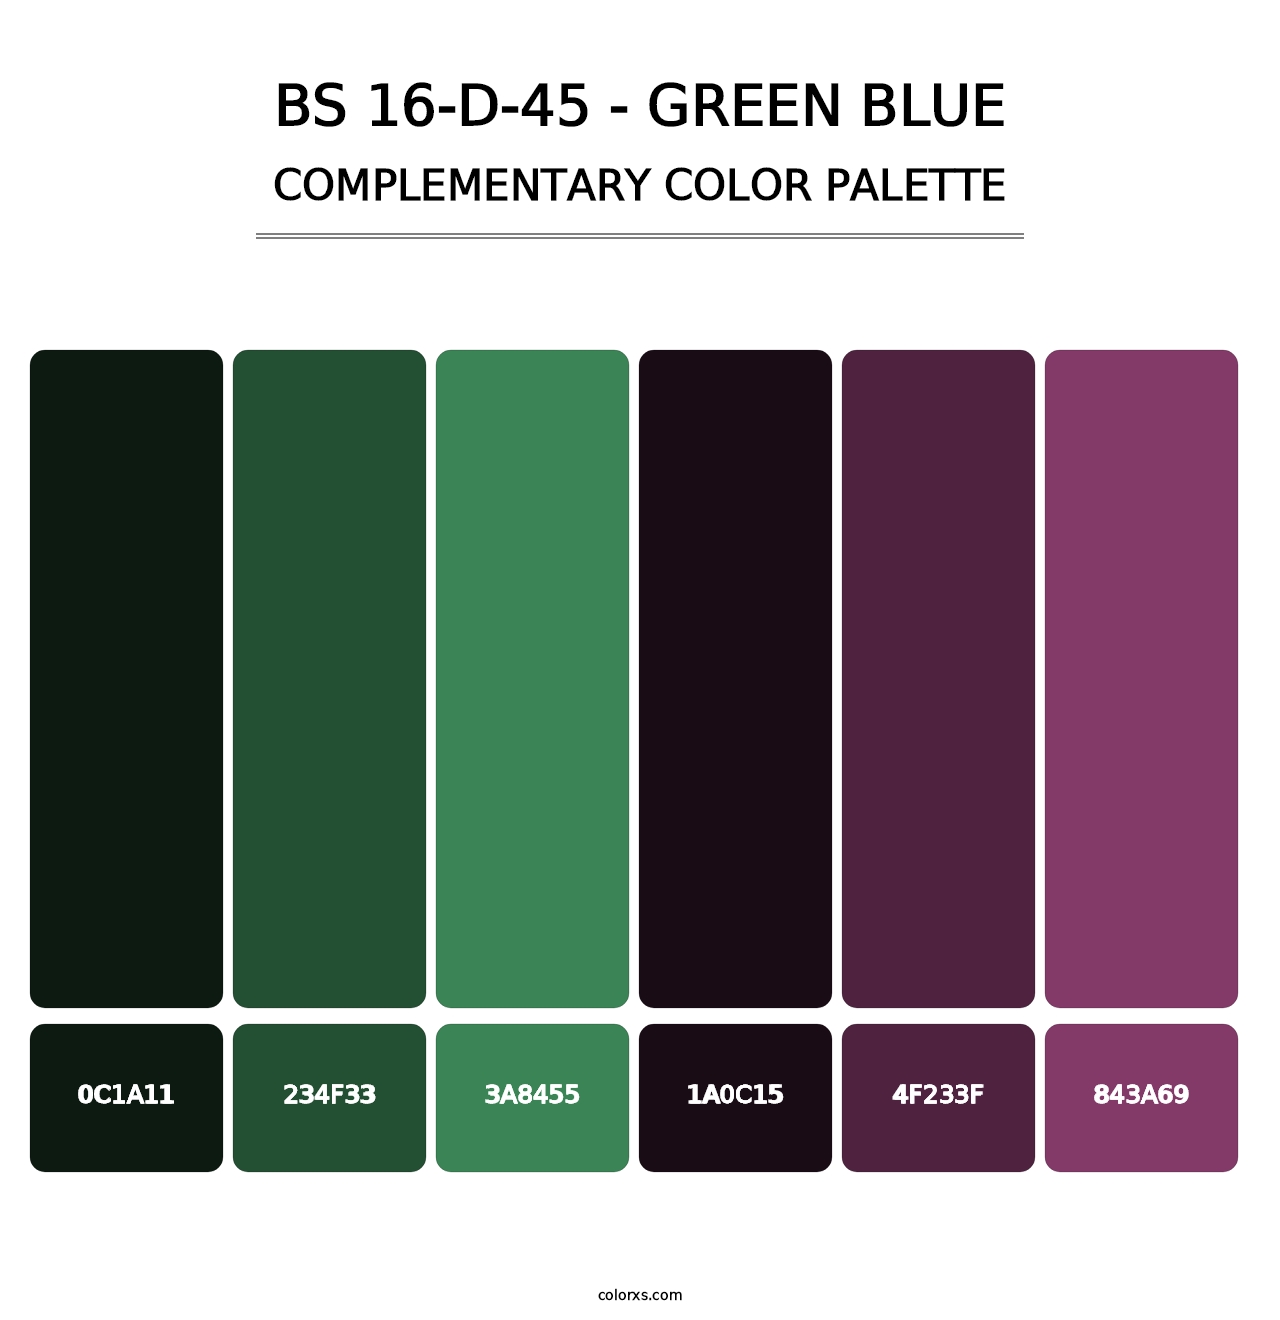 BS 16-D-45 - Green Blue - Complementary Color Palette